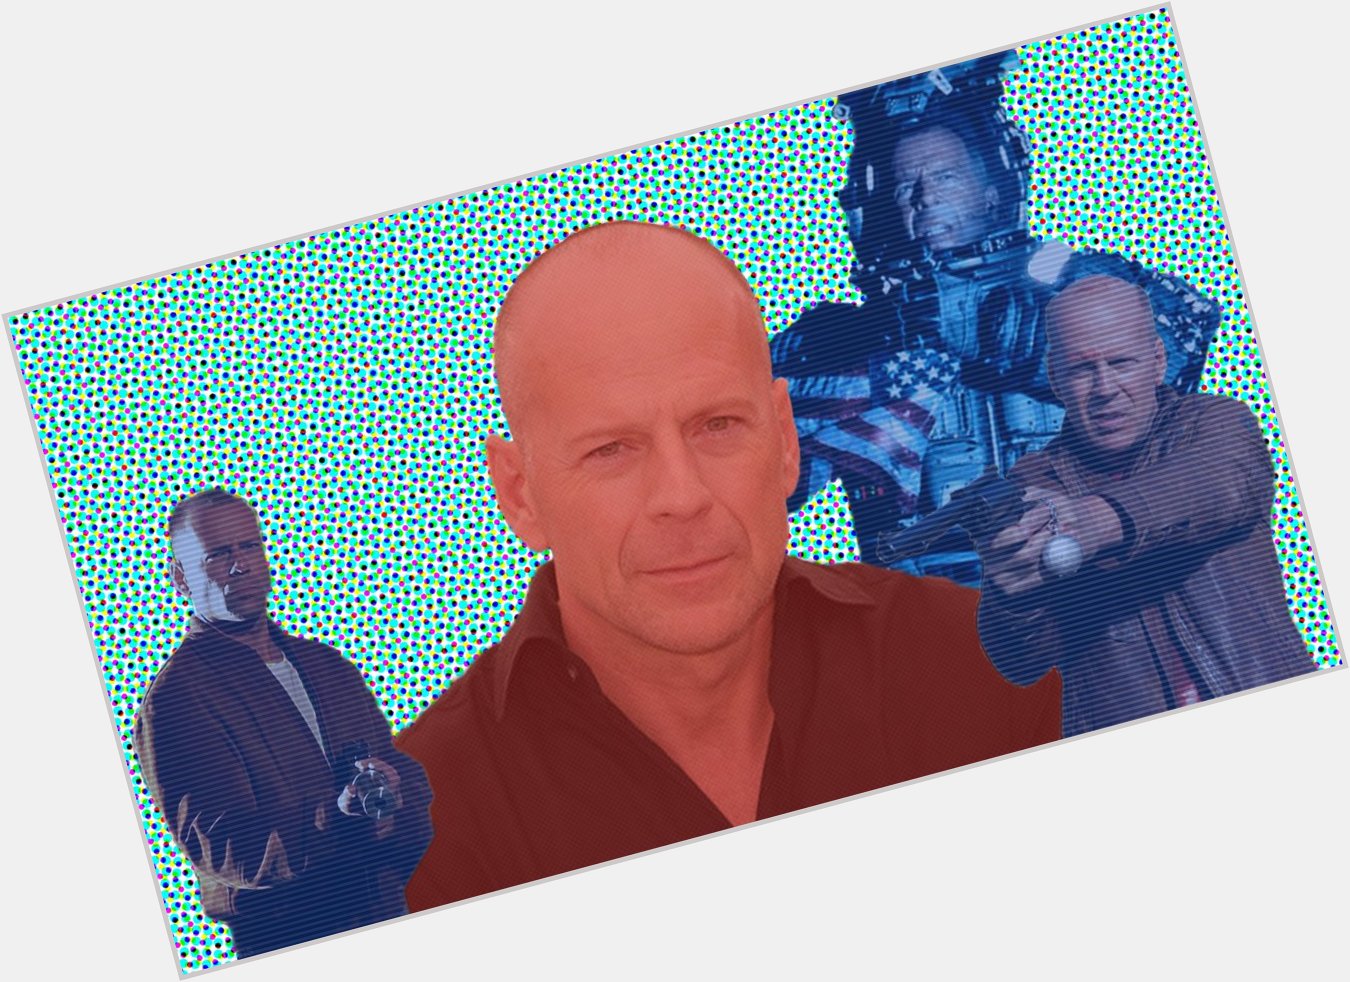 Happy Birthday Bruce Willis! What is your favorite role he has played? 